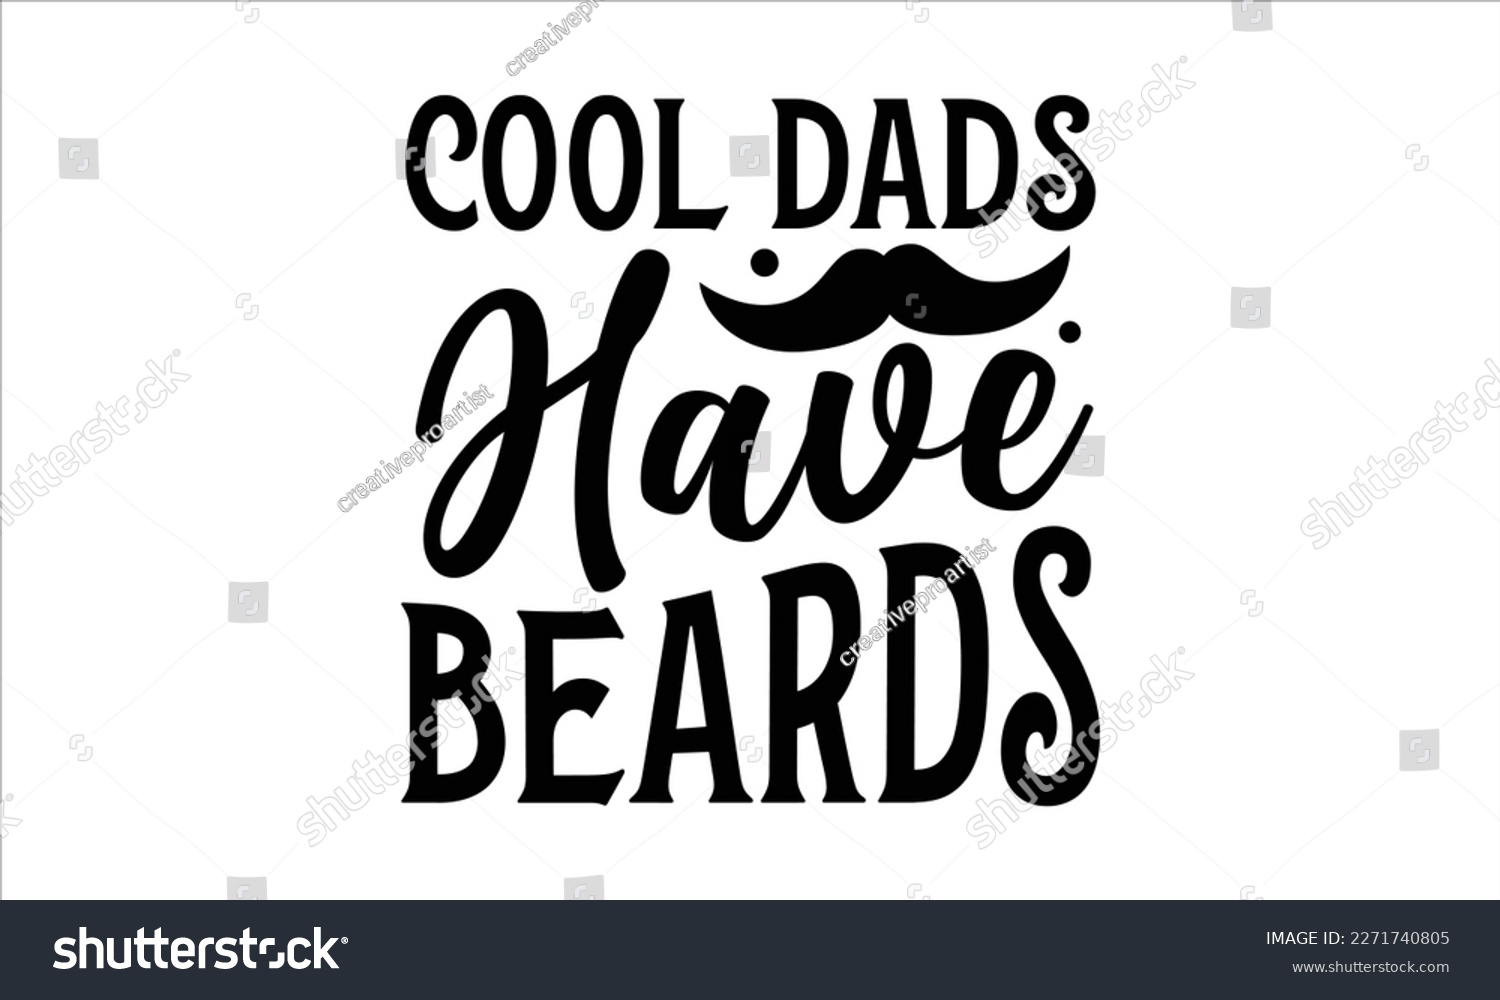 SVG of Cool dads have beards- Father's Day svg design, Hand drawn lettering phrase isolated on white background, Illustration for prints on t-shirts and bags, posters, cards eps 10. svg